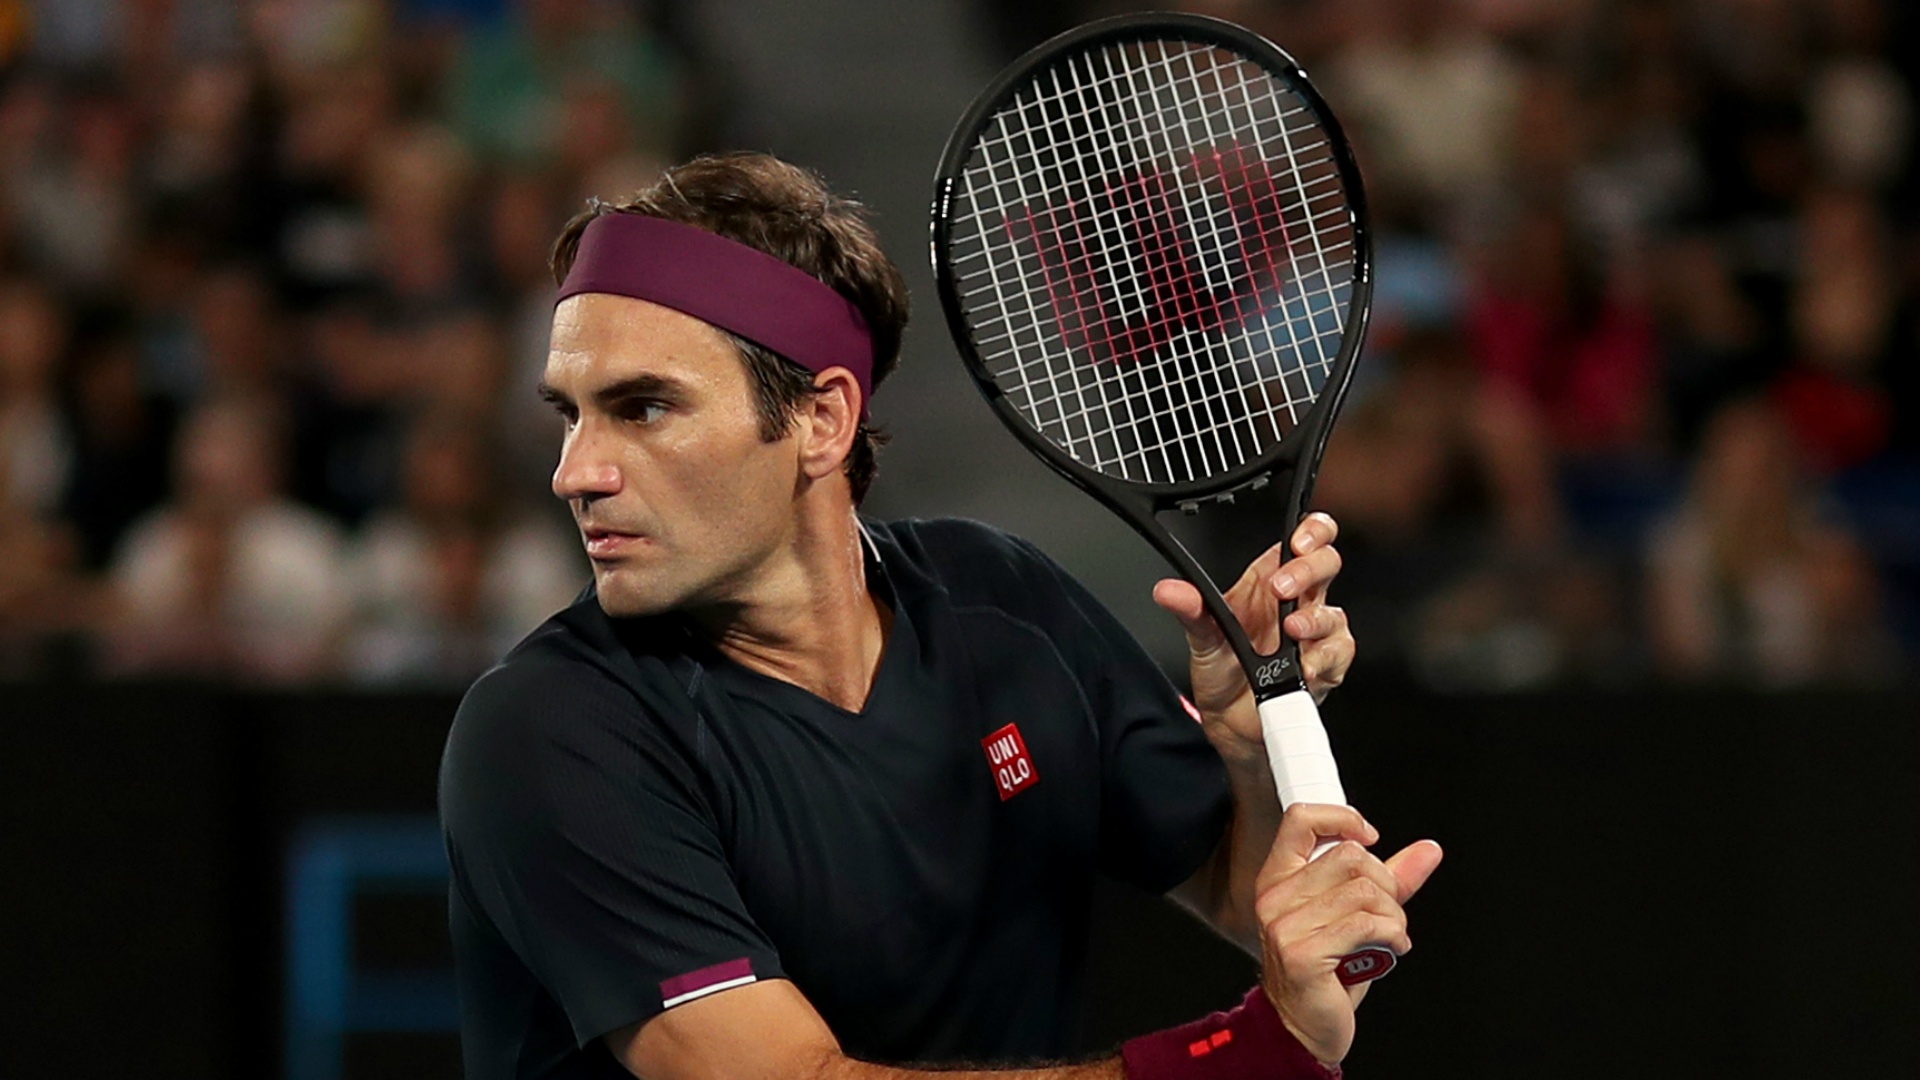 Australian Open 2020 Roger Federer results and form ahead of second-round match with Filip Krajinovic